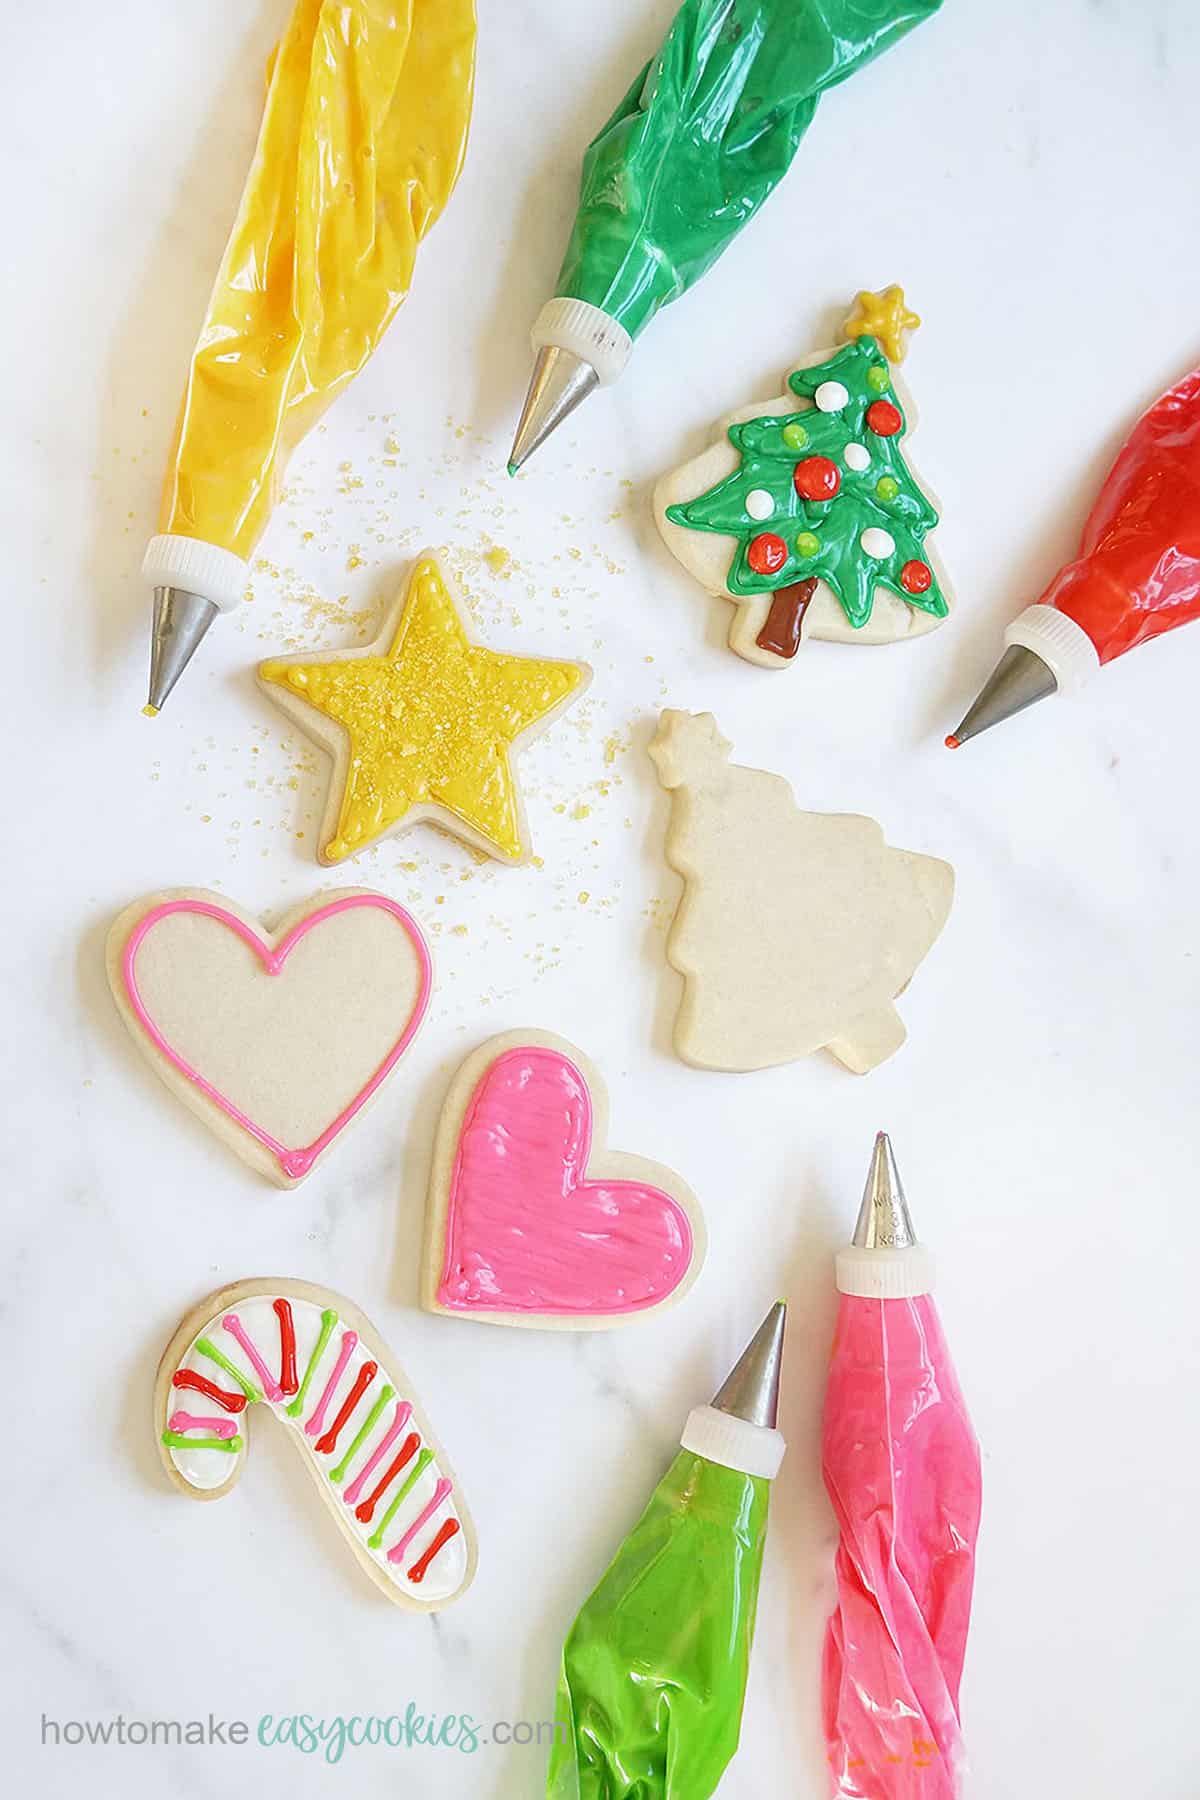 decorating cut-out sugar cookies for Christmas